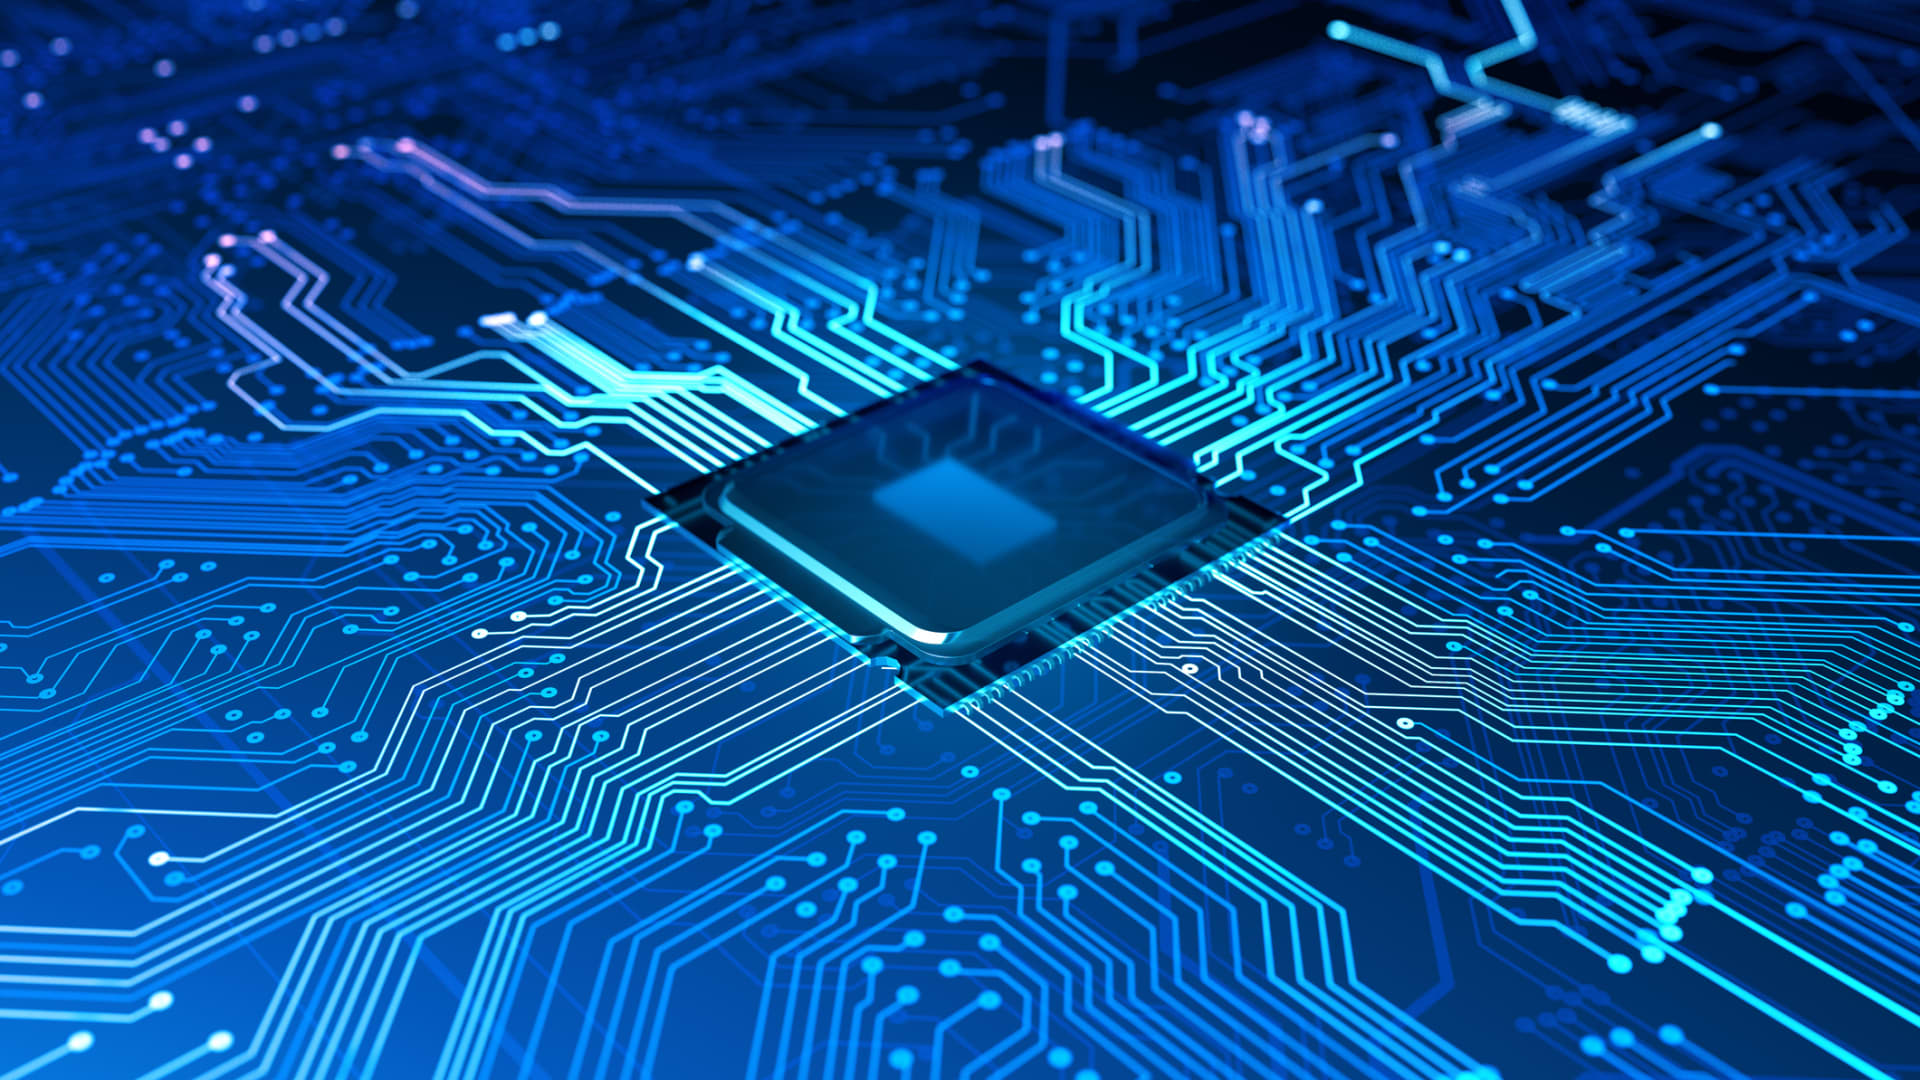 Those top-rated semiconductor and A.I. ETFs have upside prospective